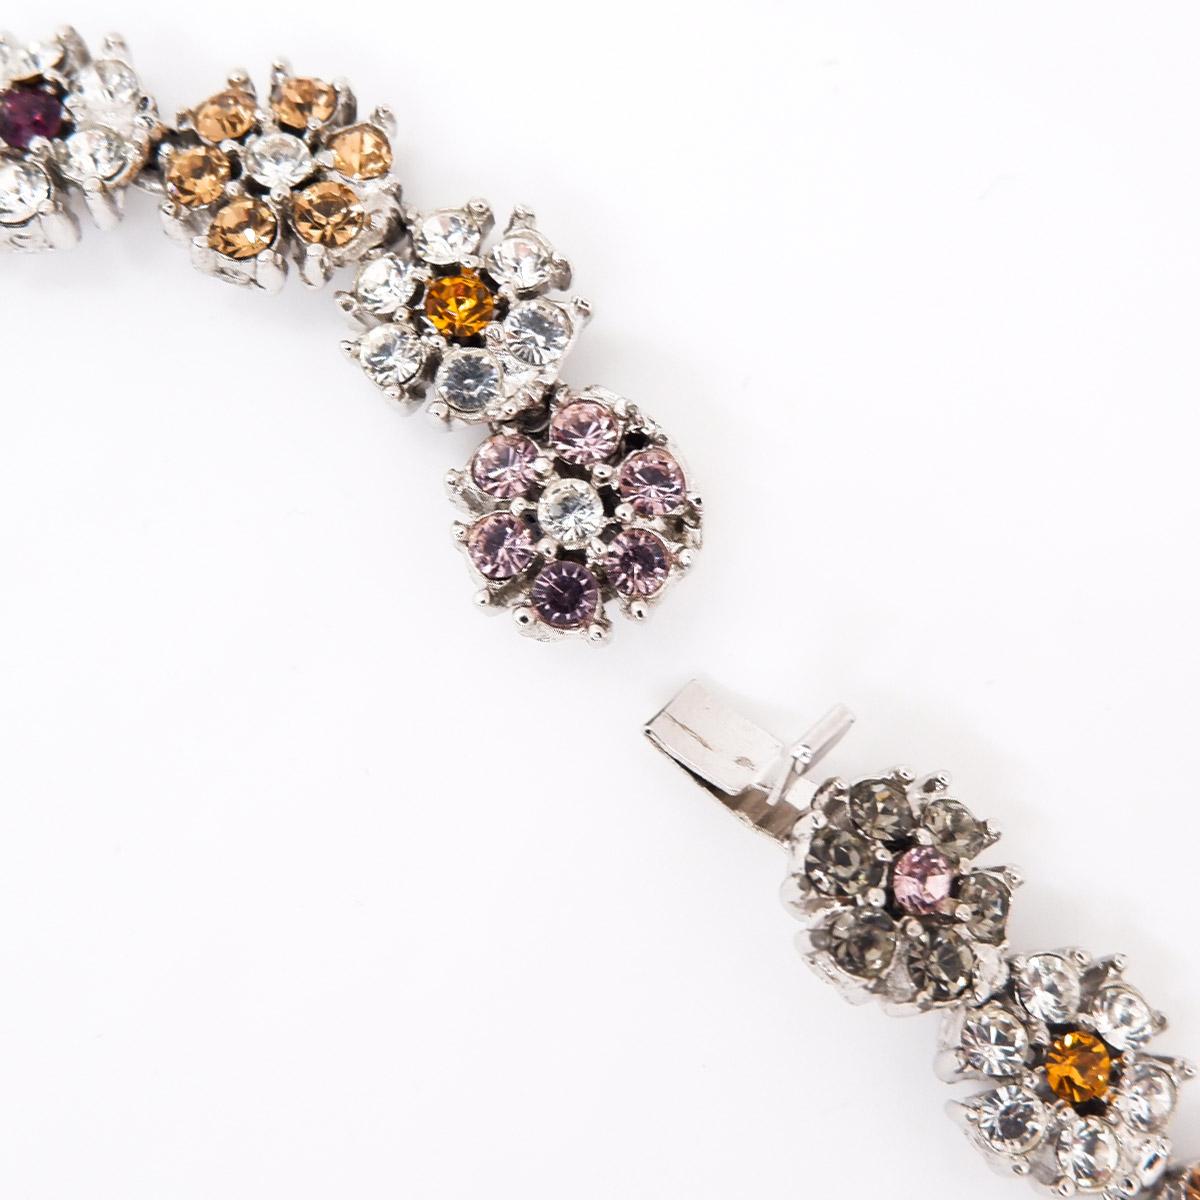 **CINER is a made-to-order house, please allow 10 business days for our artisans to create your jewelry for you** 

A sweet yet sophisticated piece, this stunning multi-rhinestone encrusted floral necklace has a timeless look and feel.

Materials: